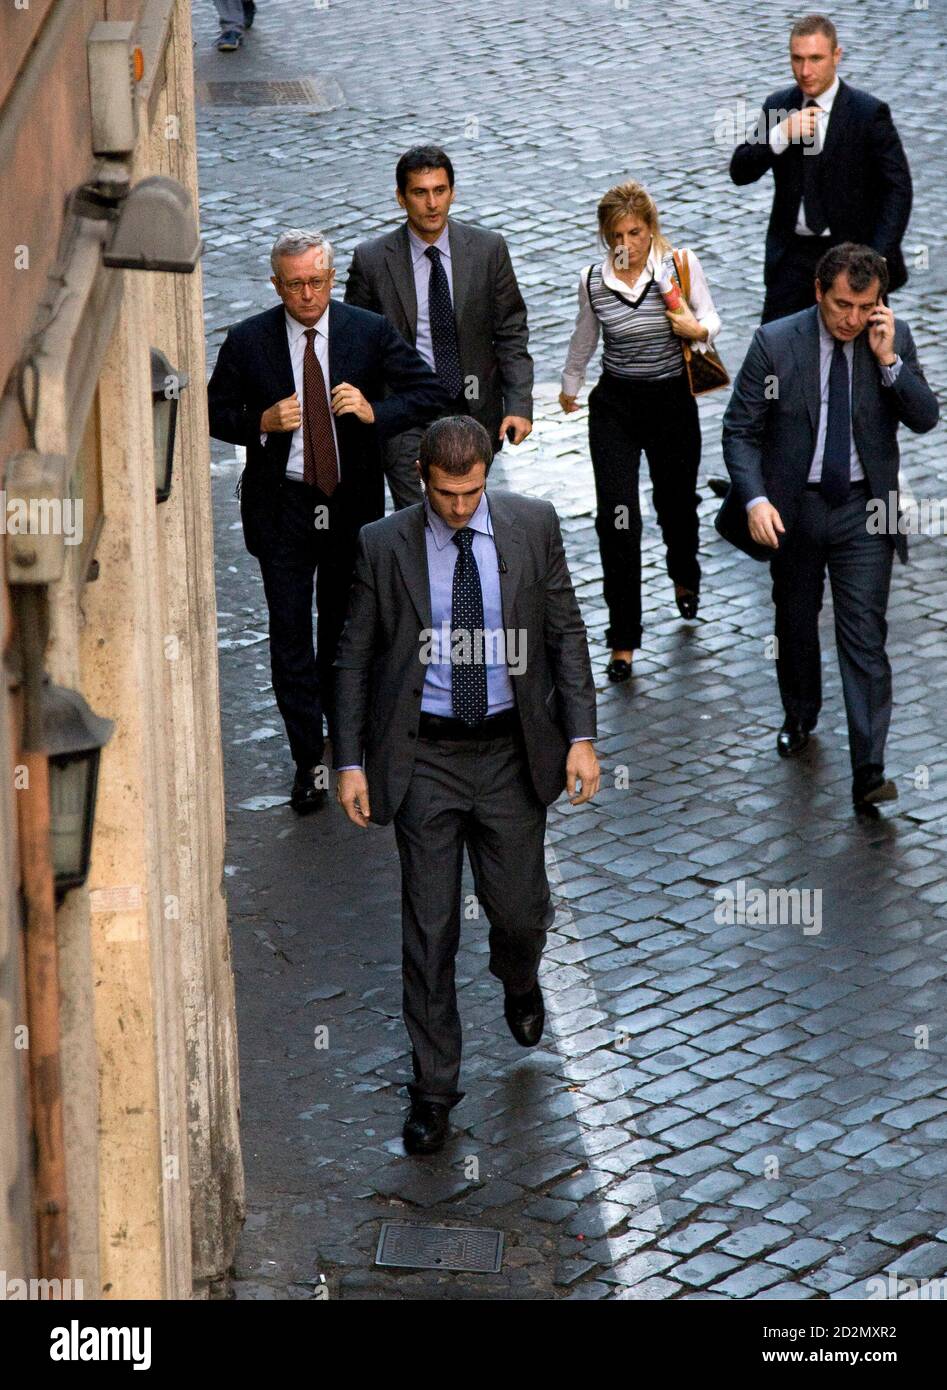 Italy's Economy Minister Giulio Tremonti (L) arrives with staff for a news conference at the Foreign Press Association in Rome October 16, 2008. Tremonti said on Thursday that the global financial and banking crisis had been overcome but persisting pessimism on markets reflected fear about the 'real' economy. REUTERS/Alessandro Bianchi        (ITALY) Stock Photo